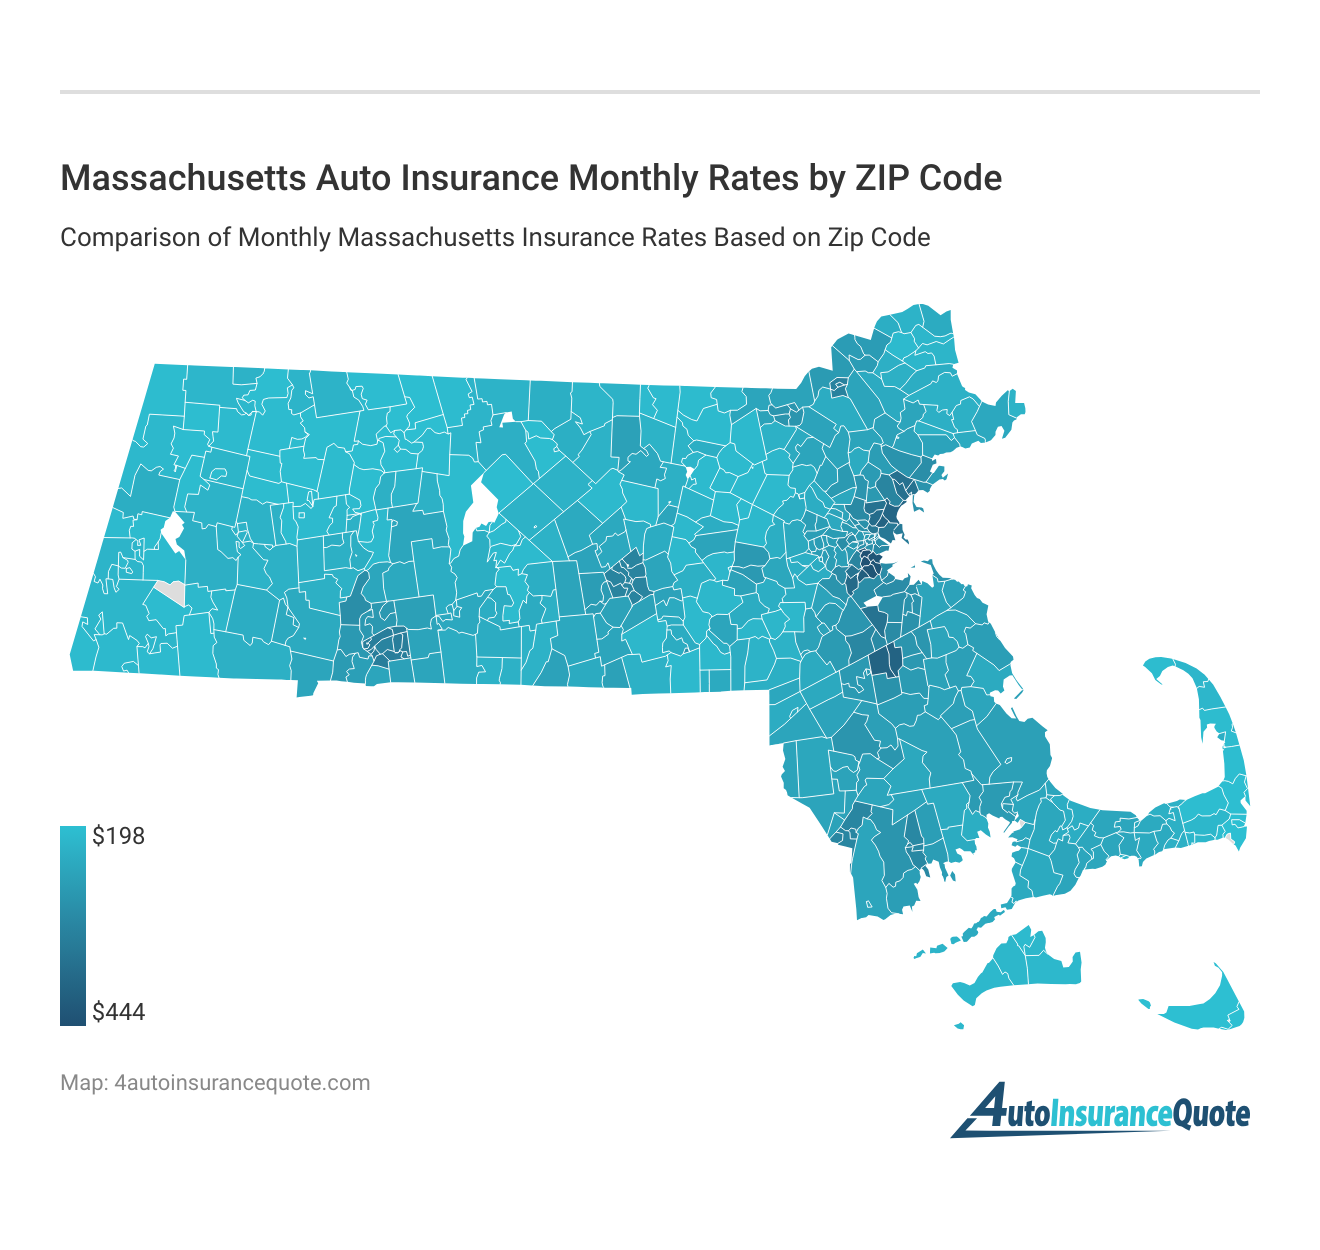 <h3>Massachusetts Auto Insurance Monthly Rates by ZIP Code</h3>